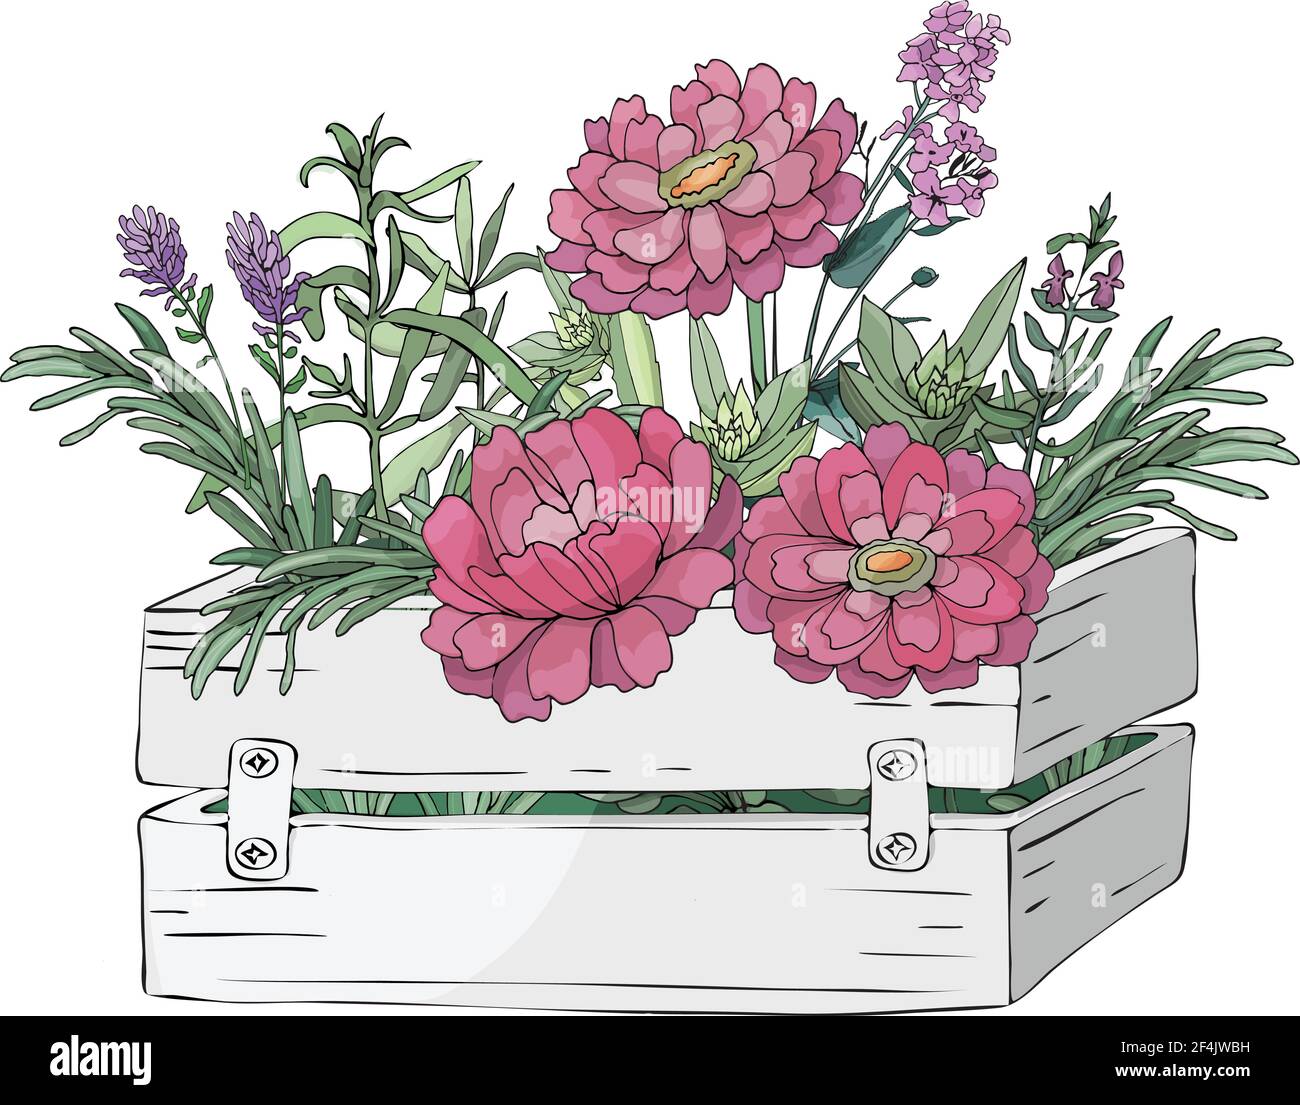 Garden flowers and leaves in a wooden box and farm fresh cooking herbs. Tarragon (silky wormwood), rosemary, lavender, zinnia, peony. Fresh cut flower Stock Vector